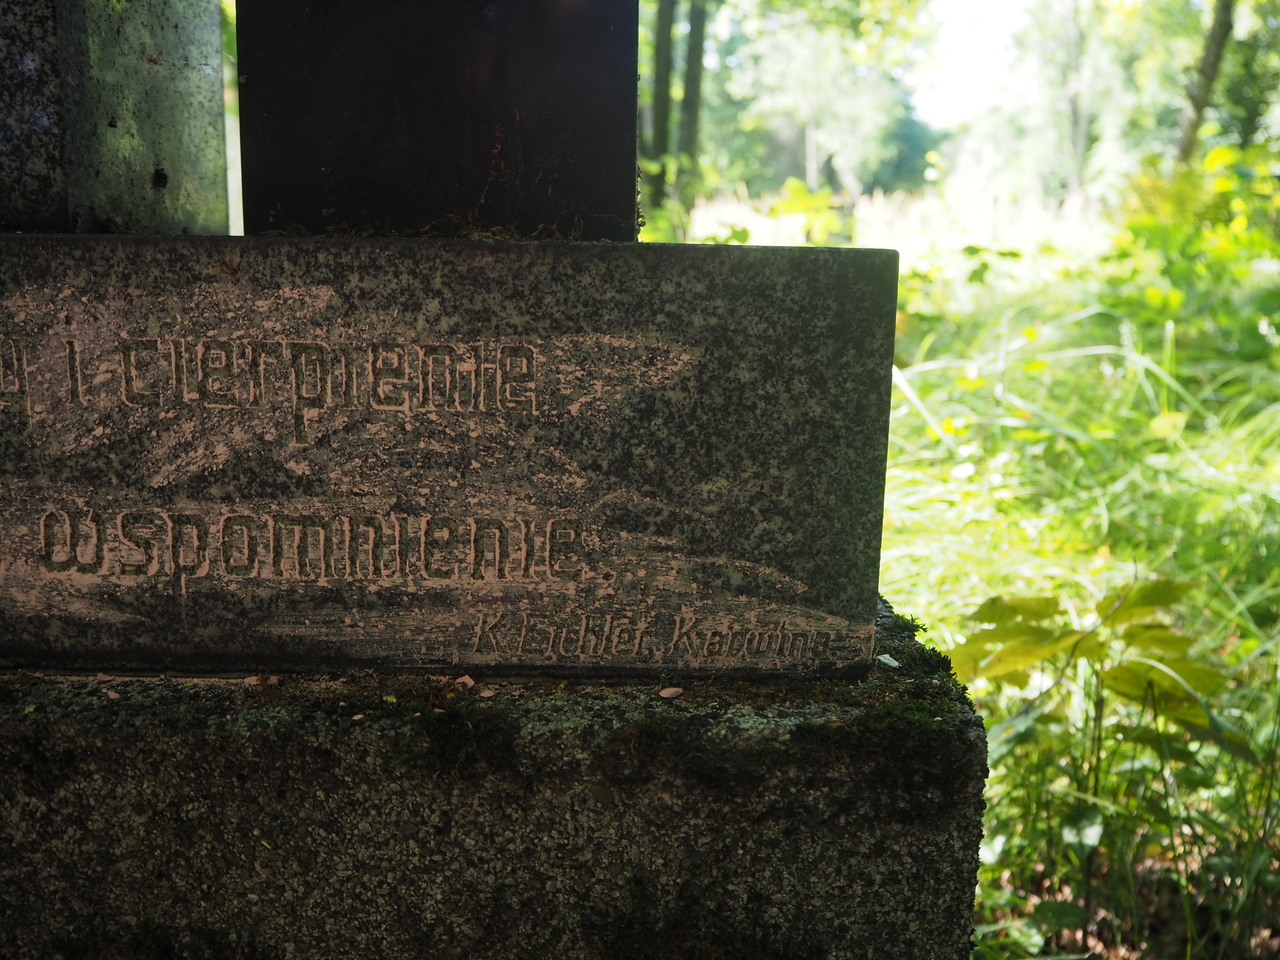 Fragment of the tombstone of Michal Flacht, cemetery in Karwienie Mexico, as of 2022